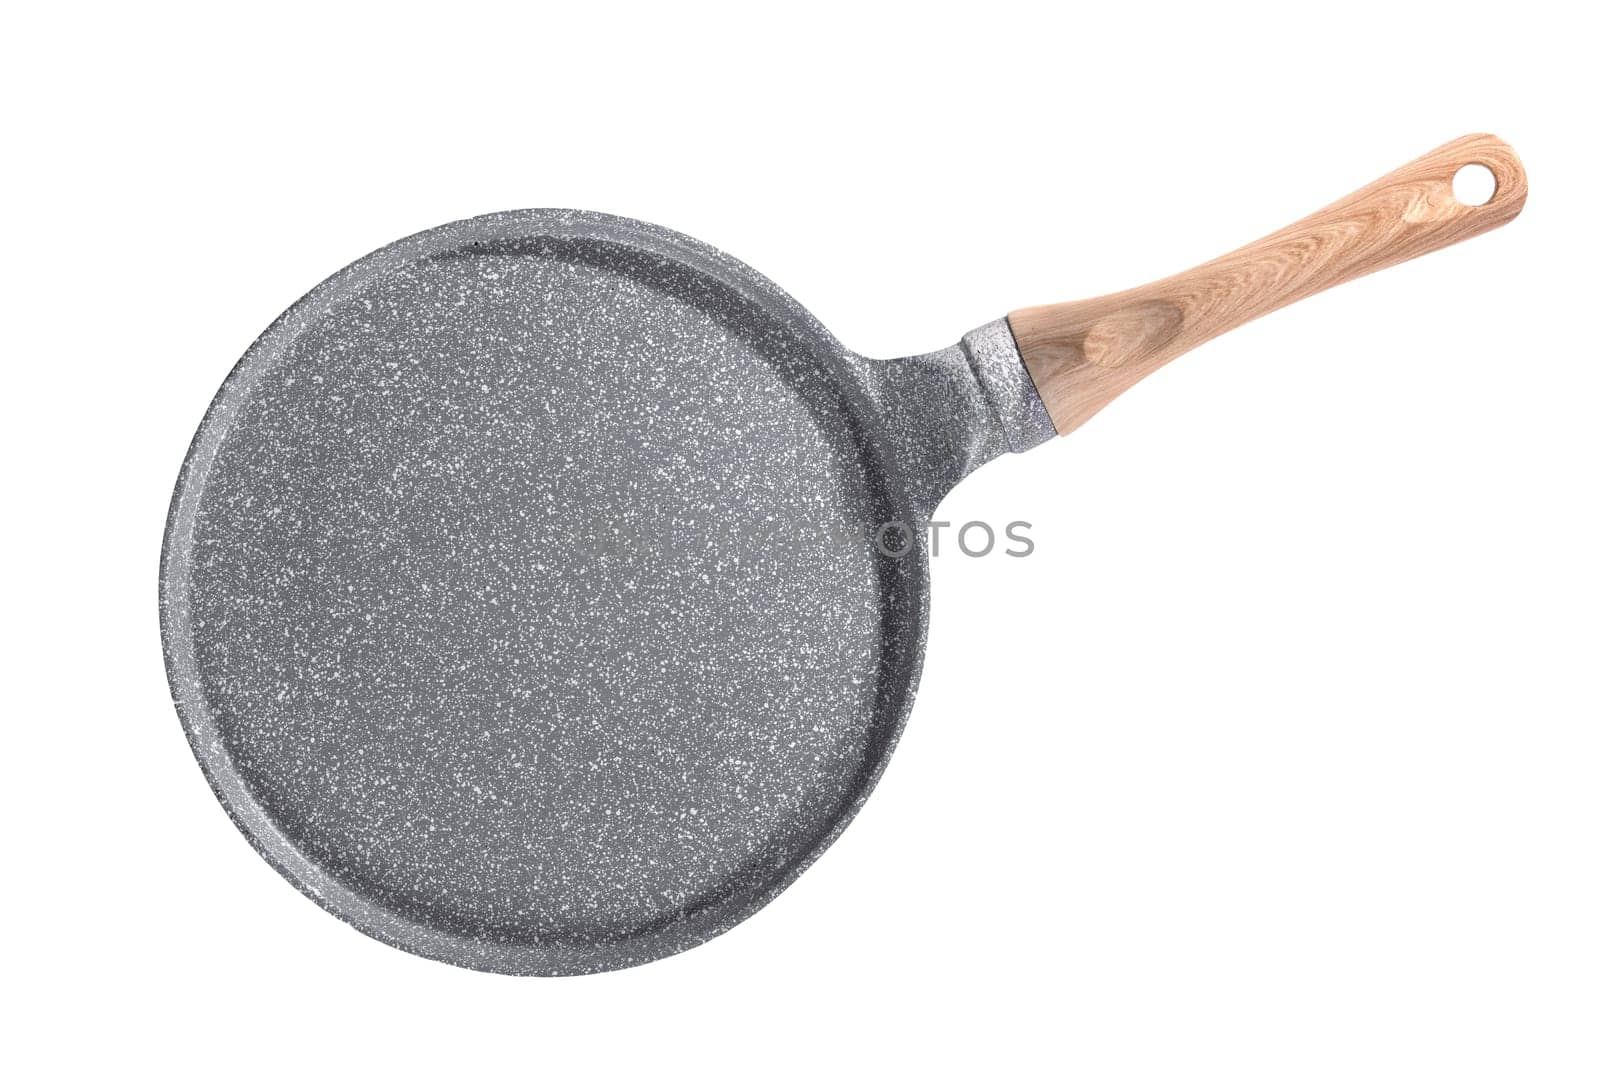 Empty pan for frying pancakes isolated on a white background. Top view.